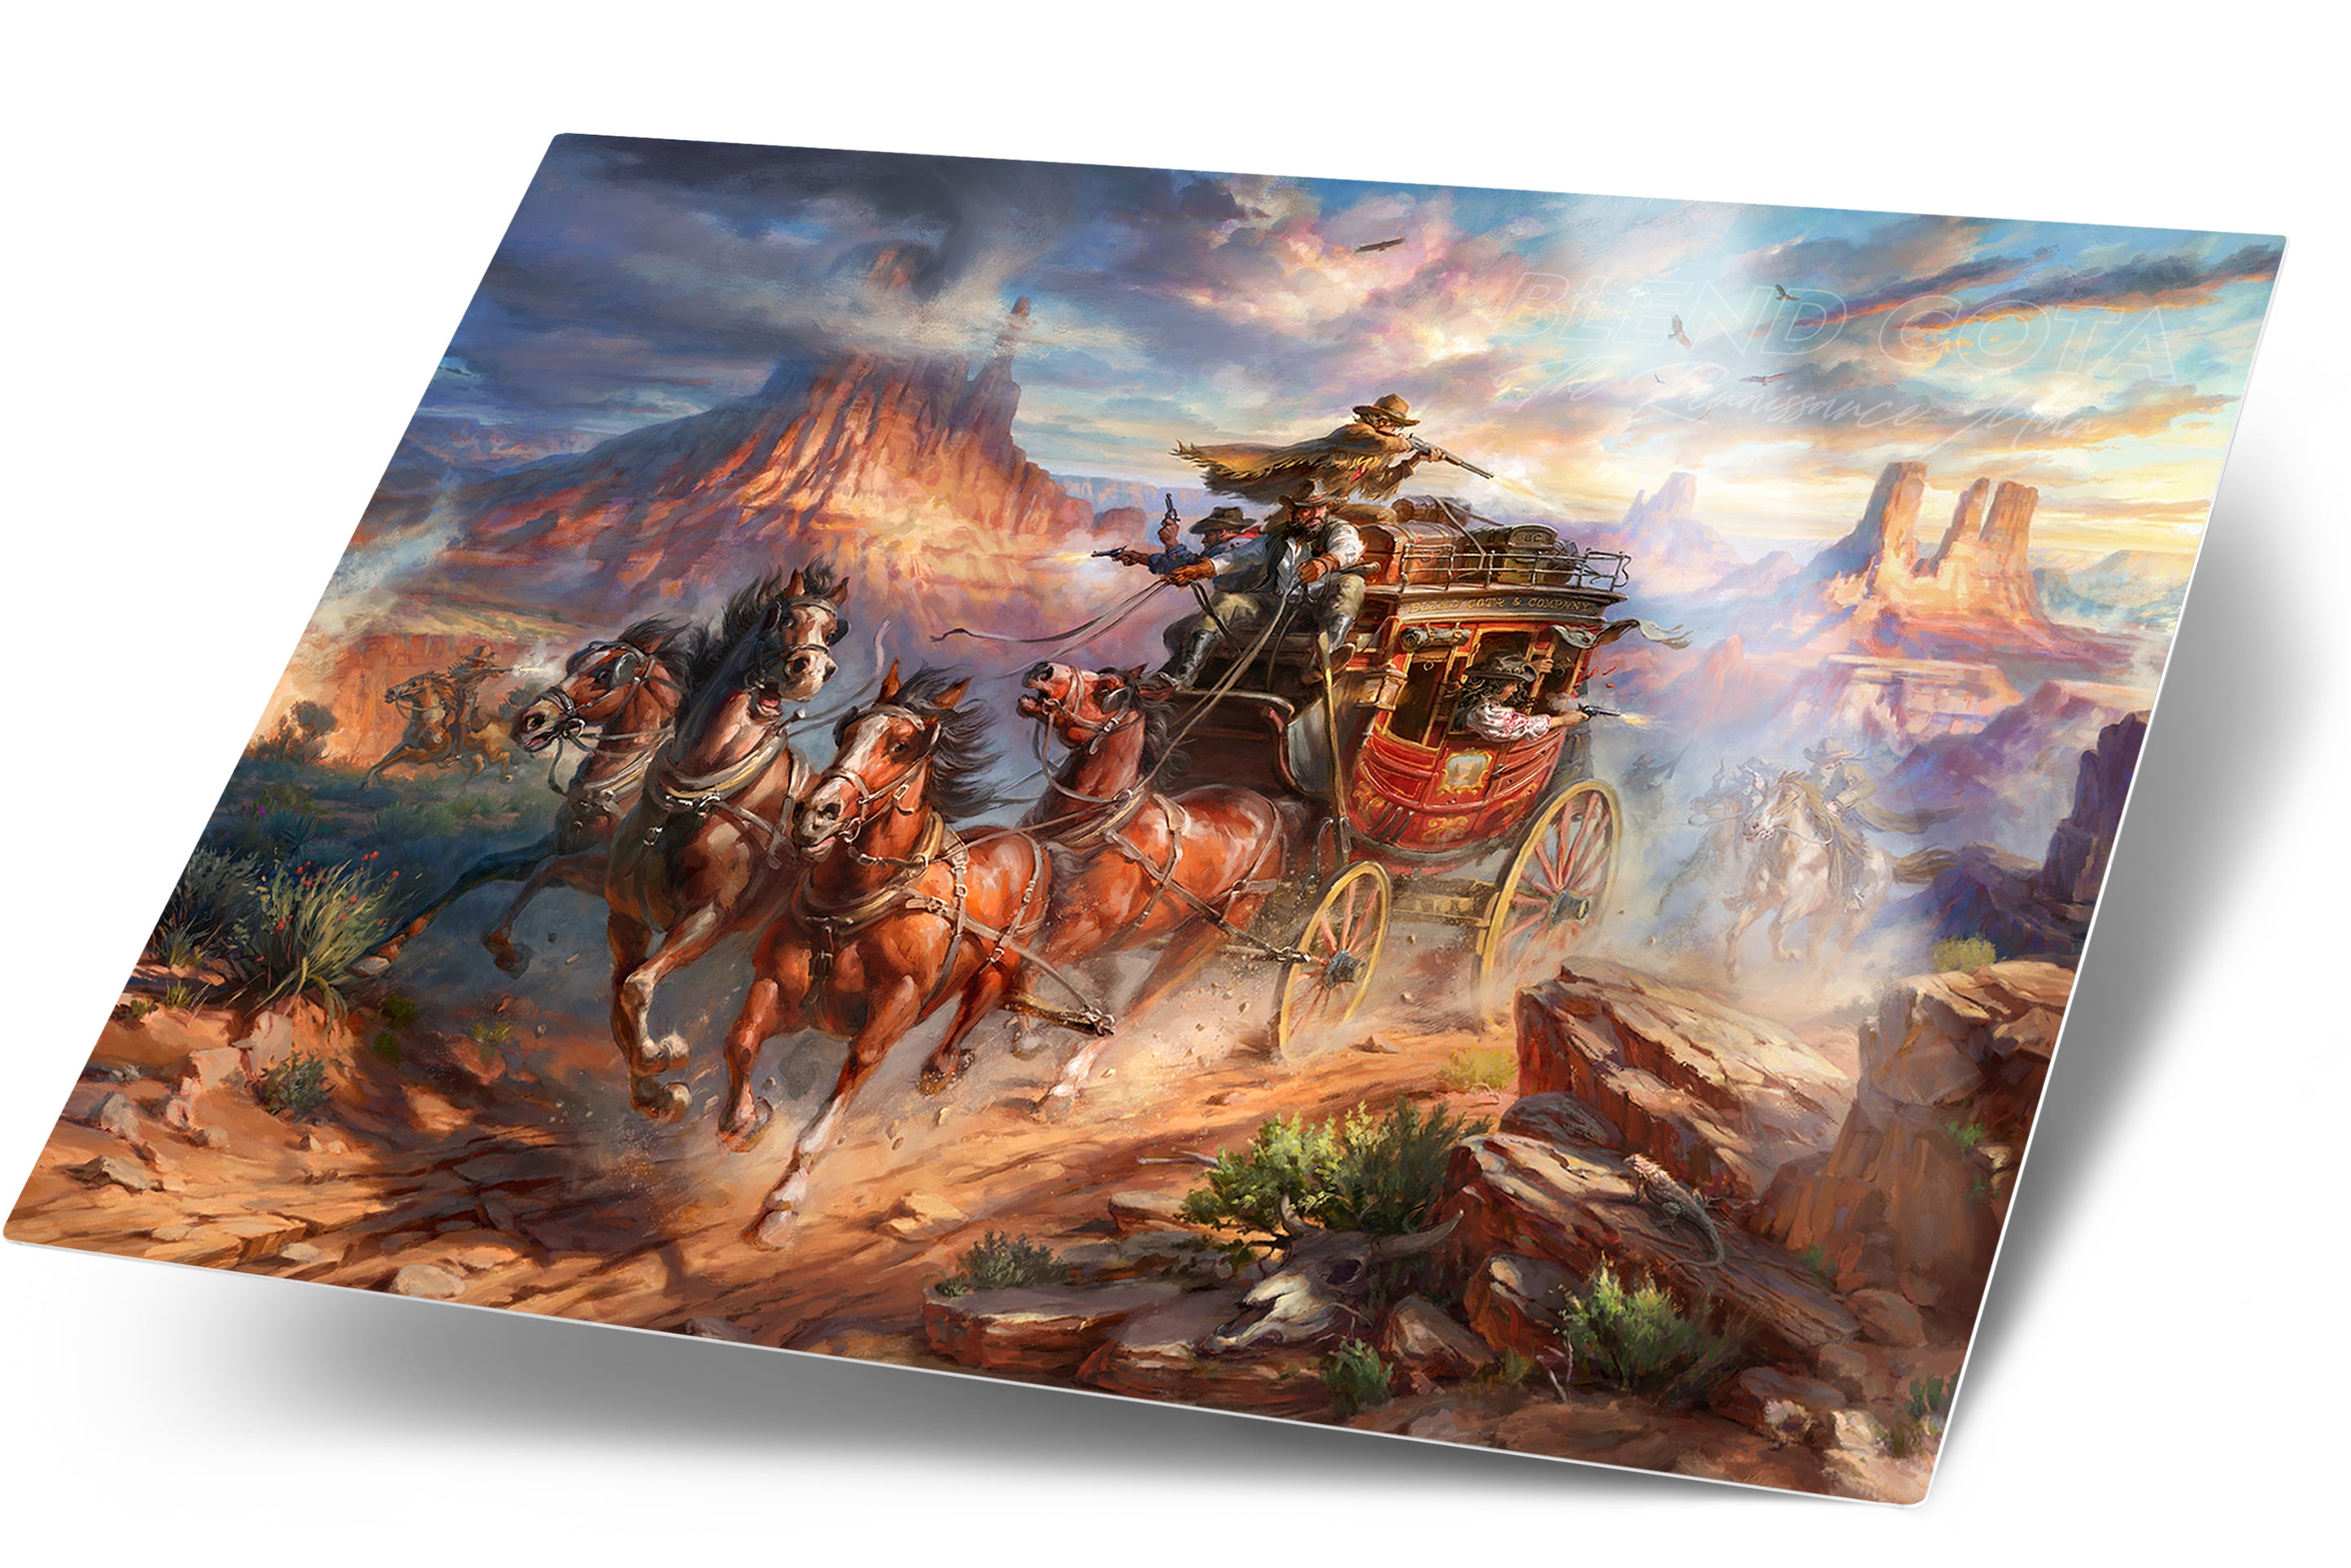 Art print on metal of outlaws attack on the Blend Cota stagecoach with cowboys shooting and horses galloping in canyons and landscape of Monument Valley, Arizona, in realism style with detailed brushstrokes.